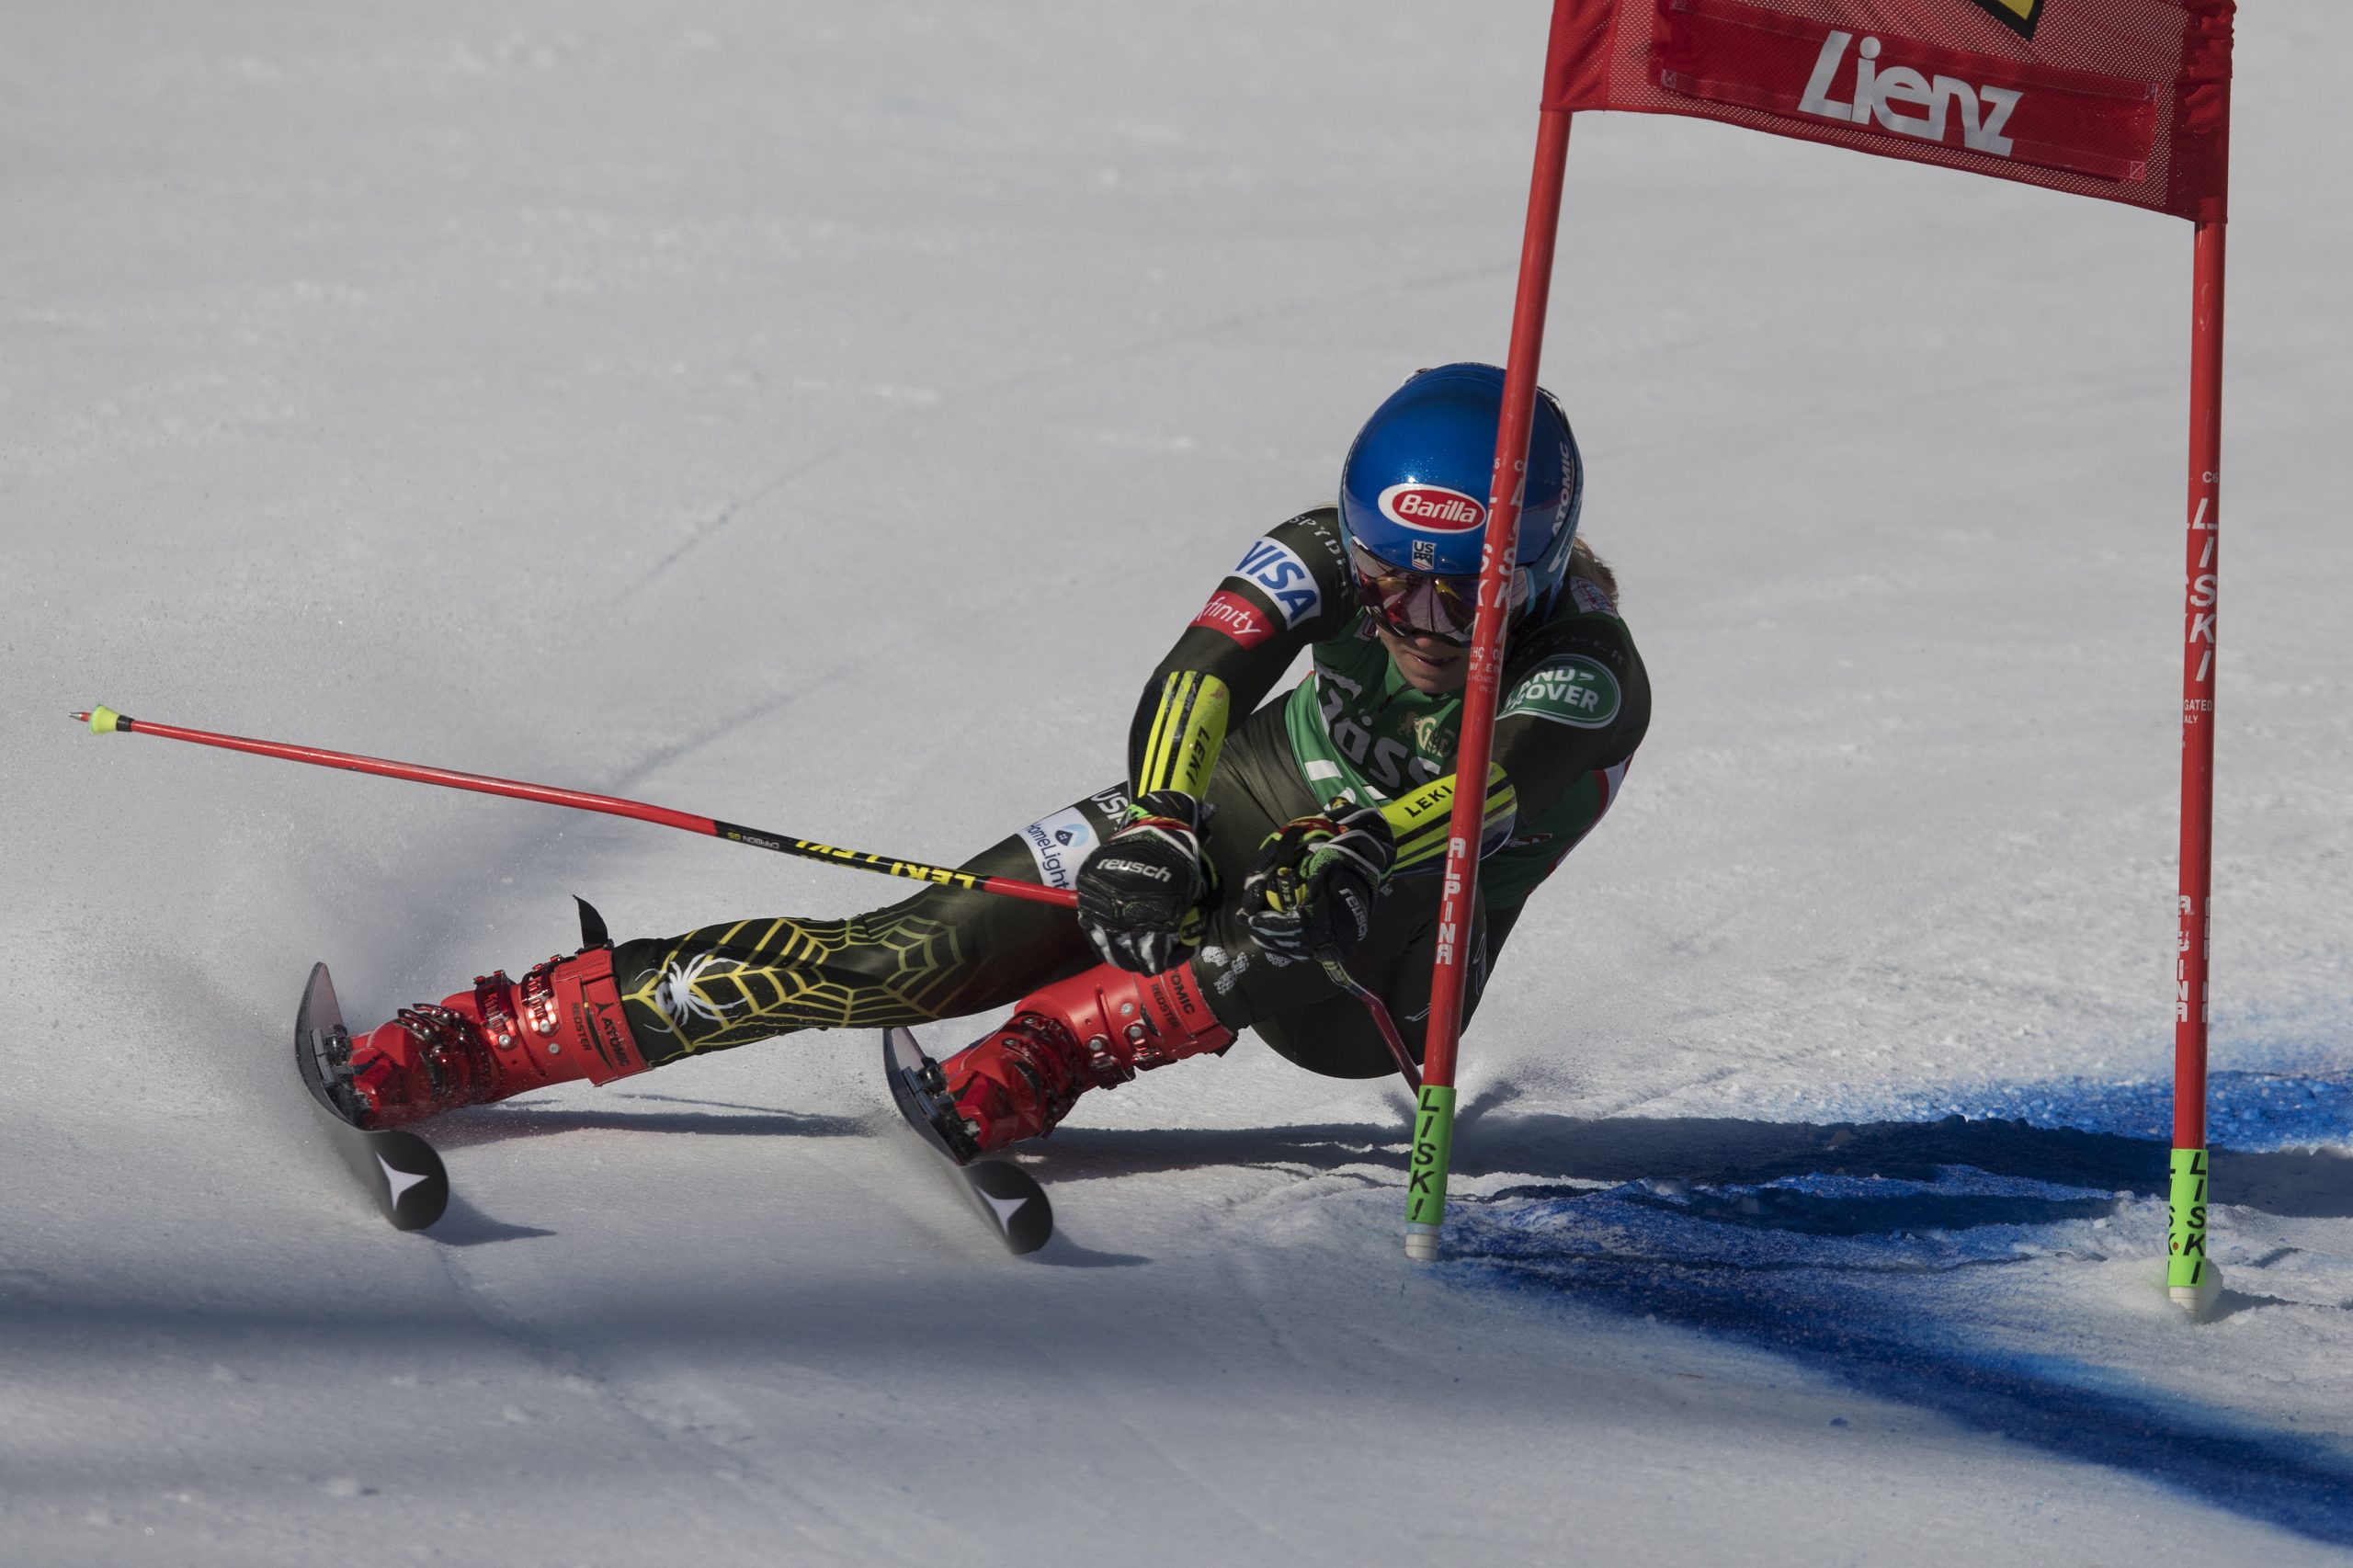 epa08092443 Mikaela Shiffrin of USA clears a gate during the first run of the Women's Giant Slalom race at the FIS Alpine Skiing World Cup event in Lienz, Austria, 28 Dezember 2019.  EPA/ANDREAS SCHAAD